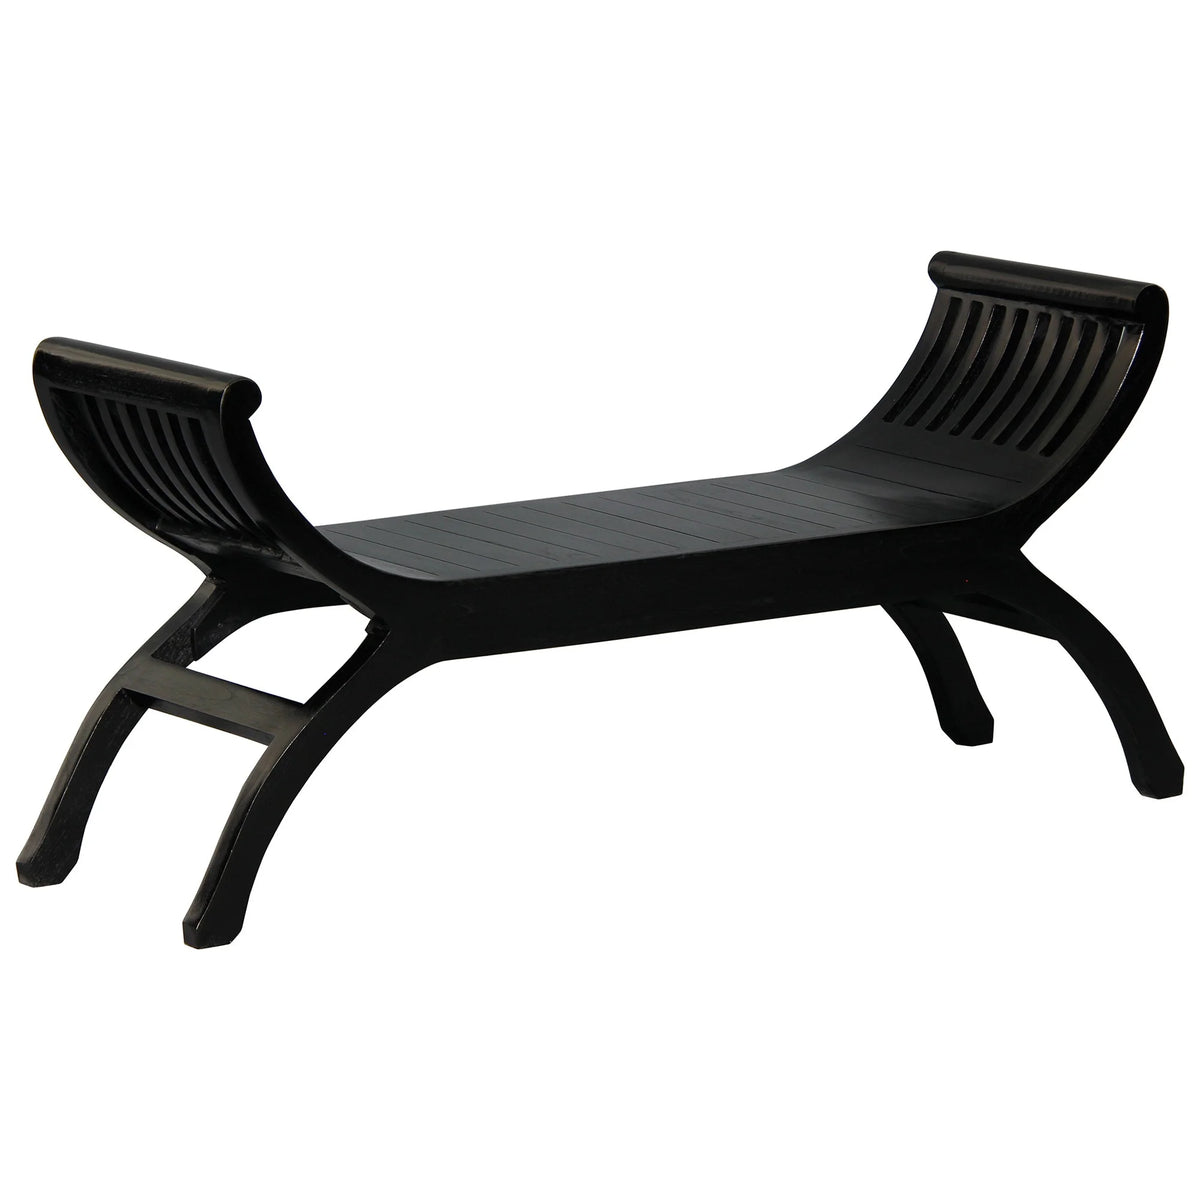 Maeve Timber 2 Seater Curved Bench - Black